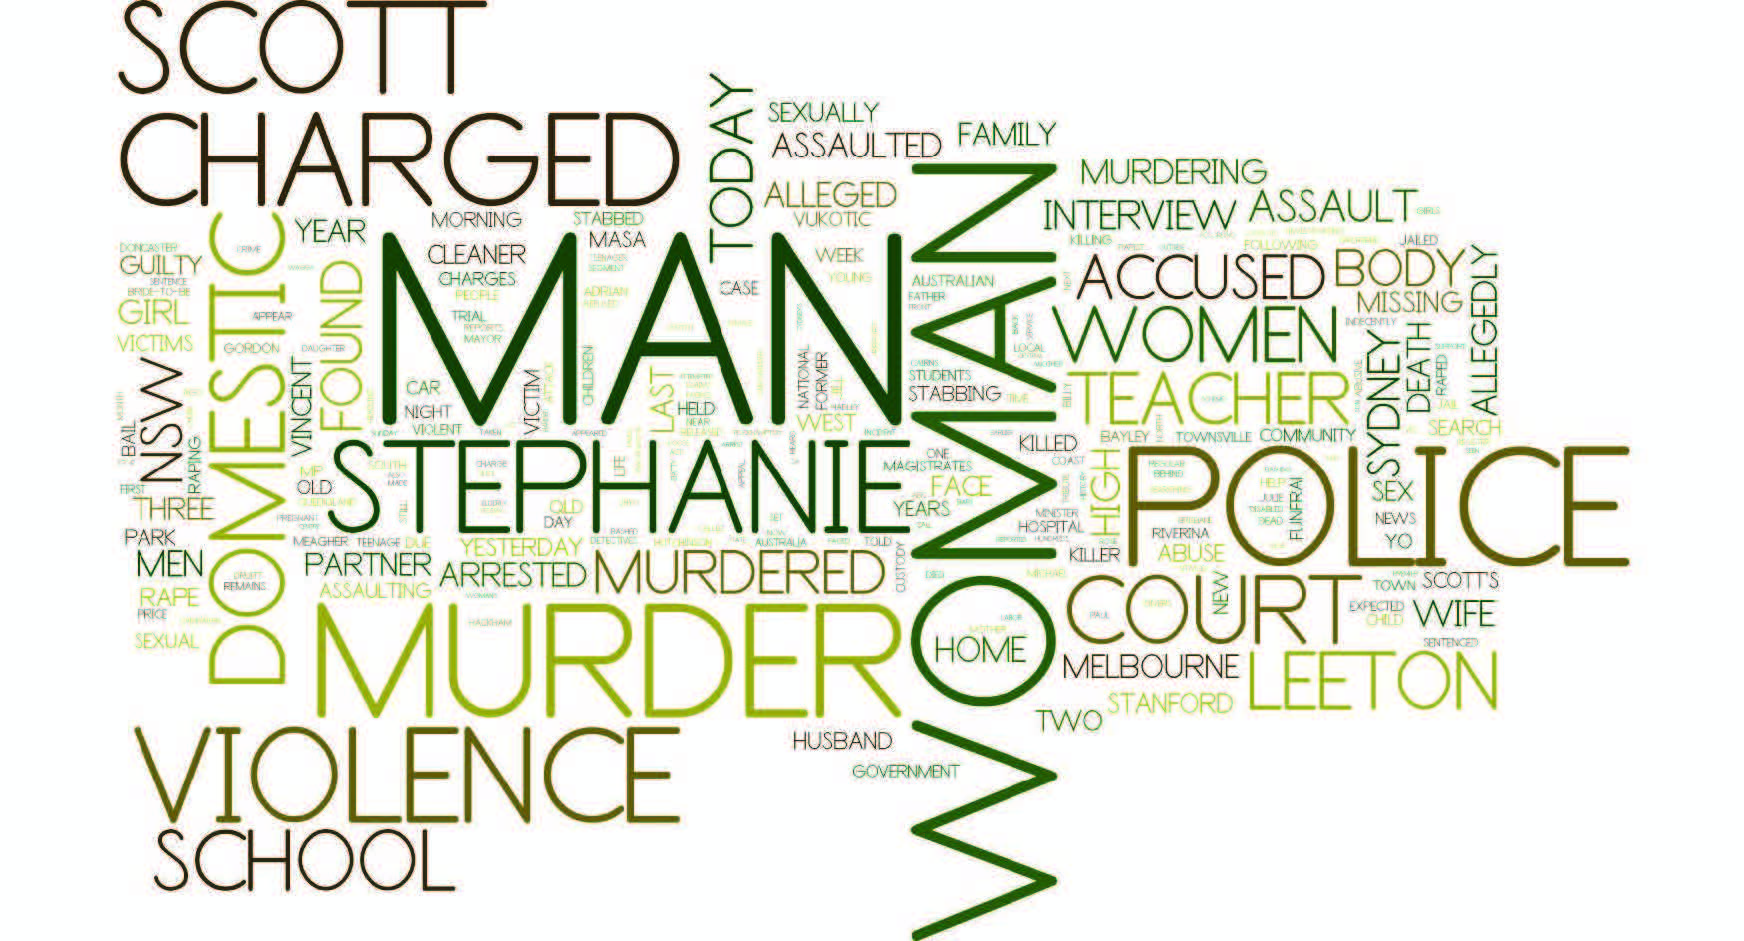 A word cloud that includes the words: man, woman, police, murder, violence, domestic, Stephanie, Scott charged, court, school and Leeton.